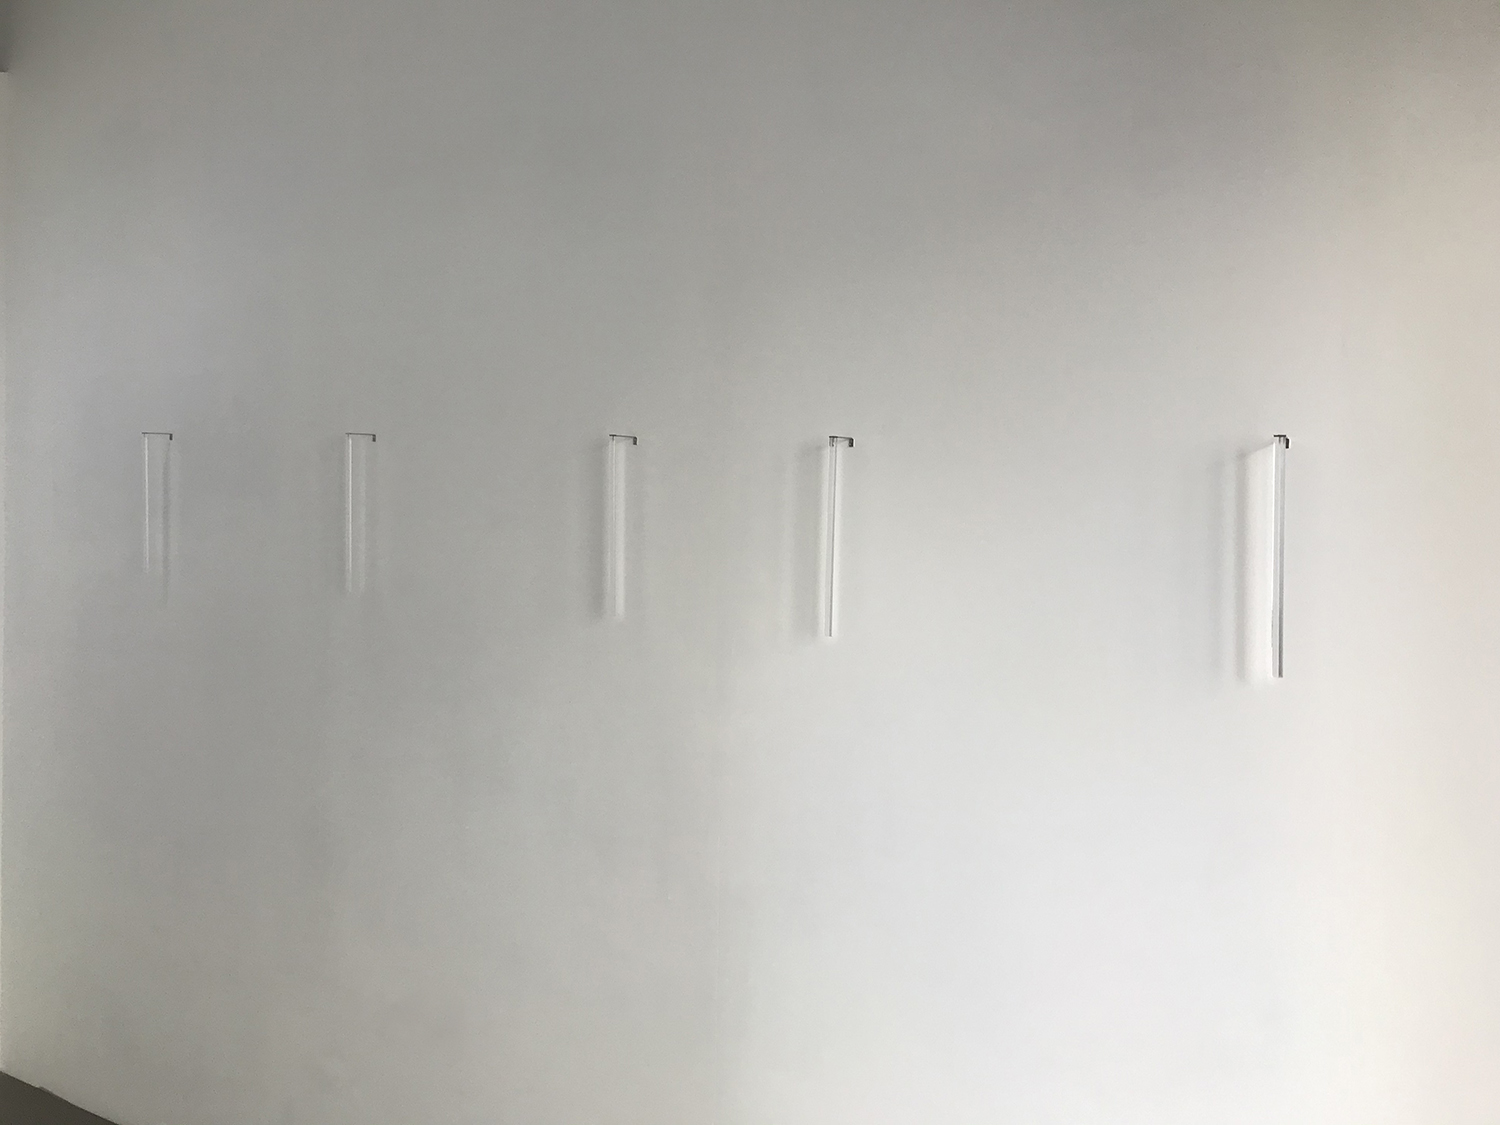 Installation view / 池田啓子｜KEIKO IKEDA<br>Untitled, clear acrylic (triangular prism), 14 x 7 x 300 mm, 60 mm (metal), 2022 each<br>¥50,000 - 150,000 each